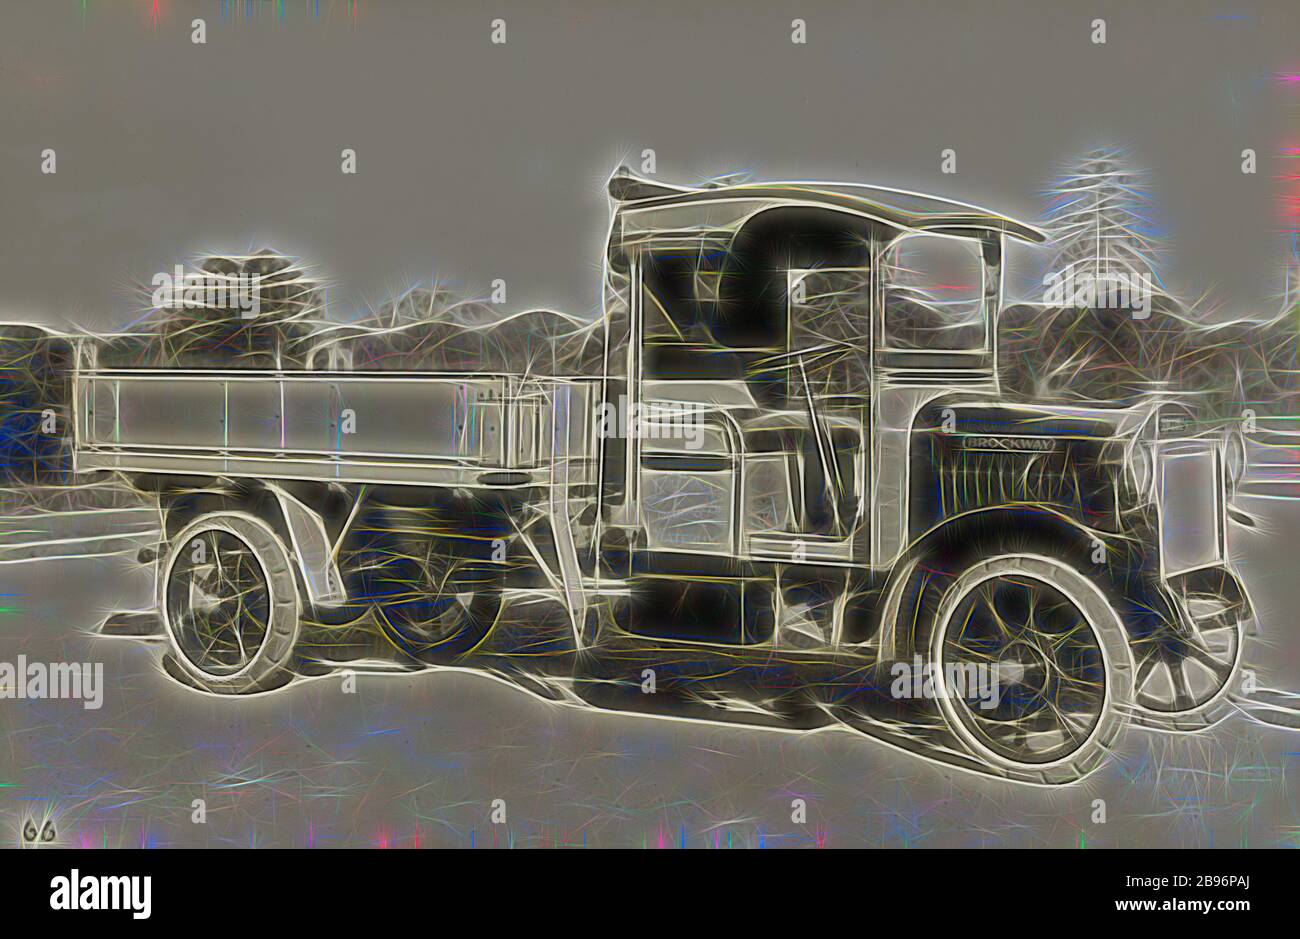 Photograph - Brockway Motors Ltd, Tipping Truck, Sydney, New South Wales, circa 1927, Image from a photograph album containing twenty one photographs of motor trucks. The album was used by Brockway Motors Ltd., Reimagined by Gibon, design of warm cheerful glowing of brightness and light rays radiance. Classic art reinvented with a modern twist. Photography inspired by futurism, embracing dynamic energy of modern technology, movement, speed and revolutionize culture. Stock Photo